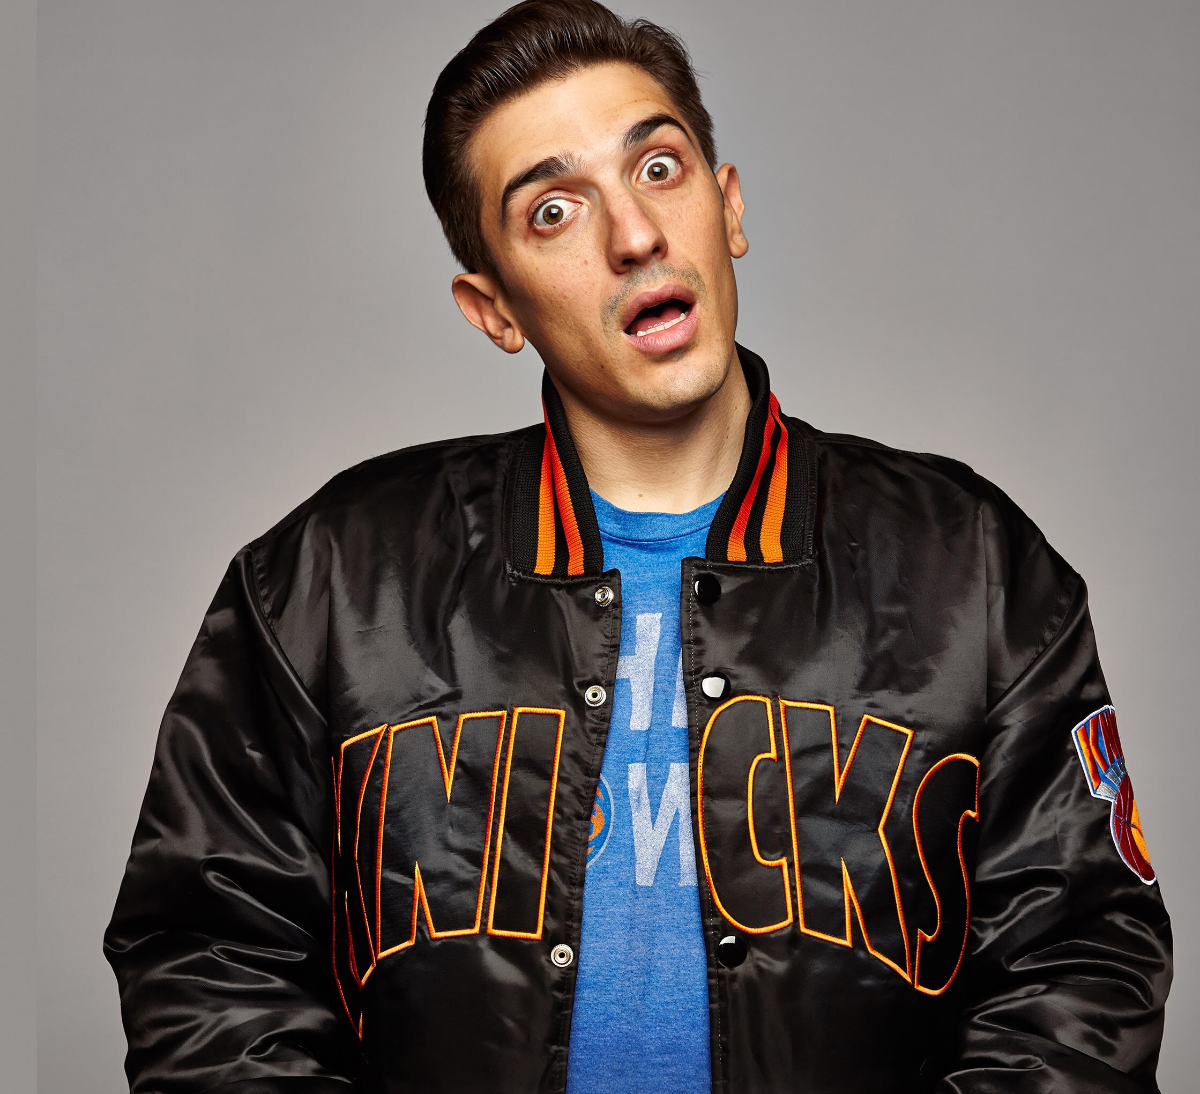 Andrew Schulz at Raleigh Improv